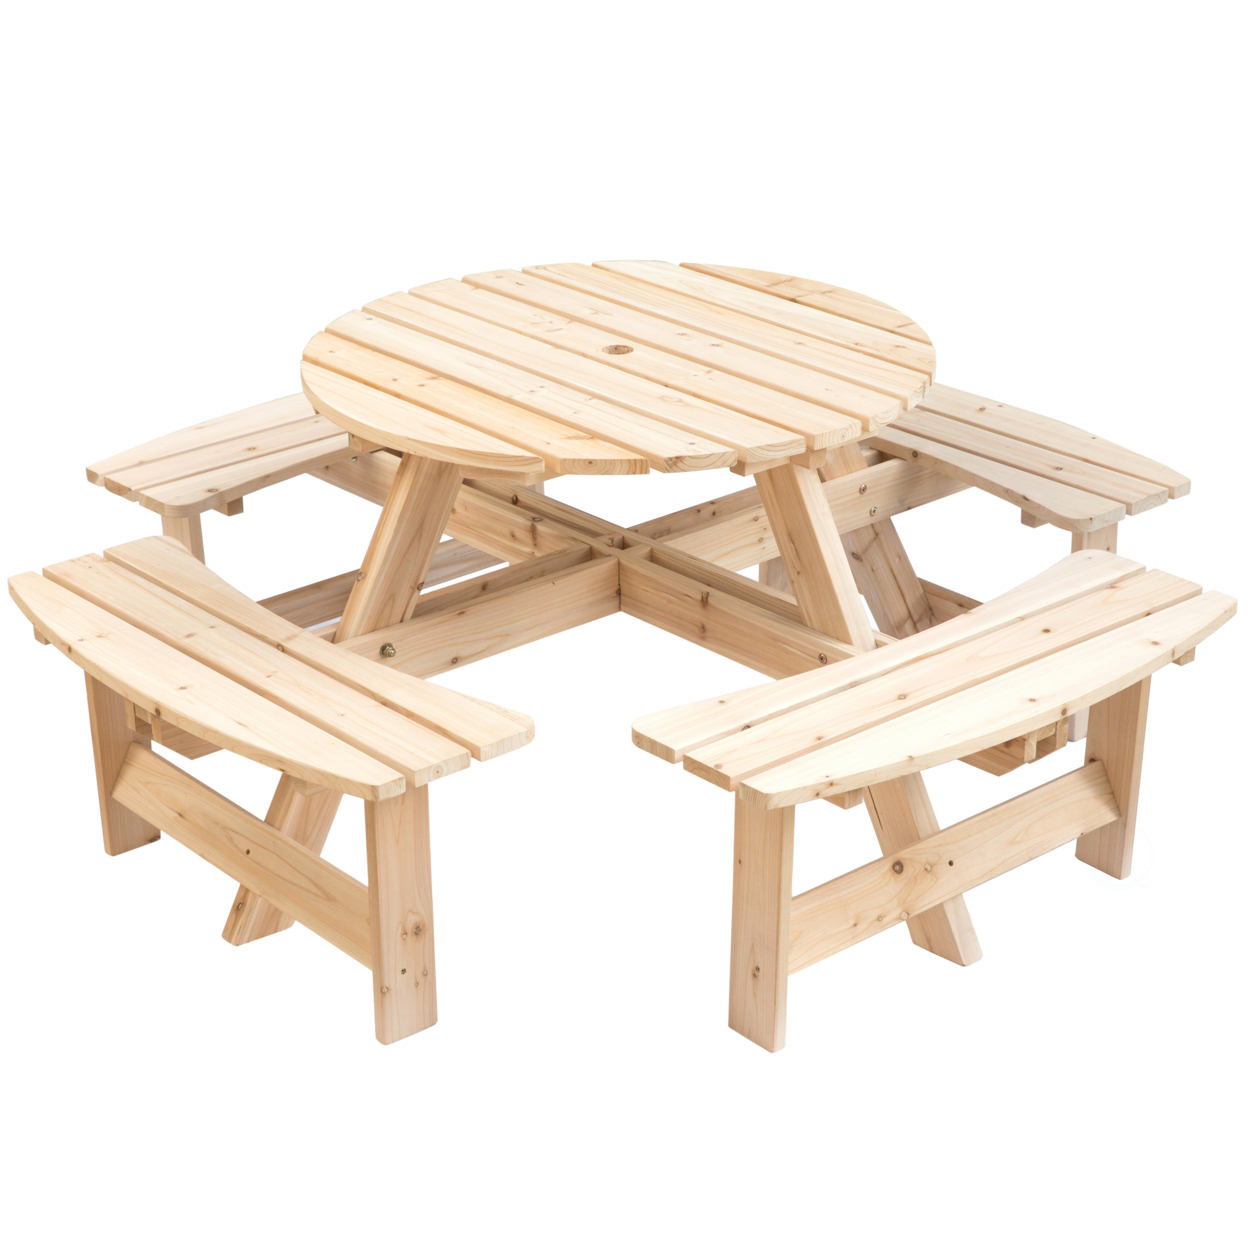 Wooden Outdoor Patio Garden Round Picnic Table With Bench, 8 Person - Natural